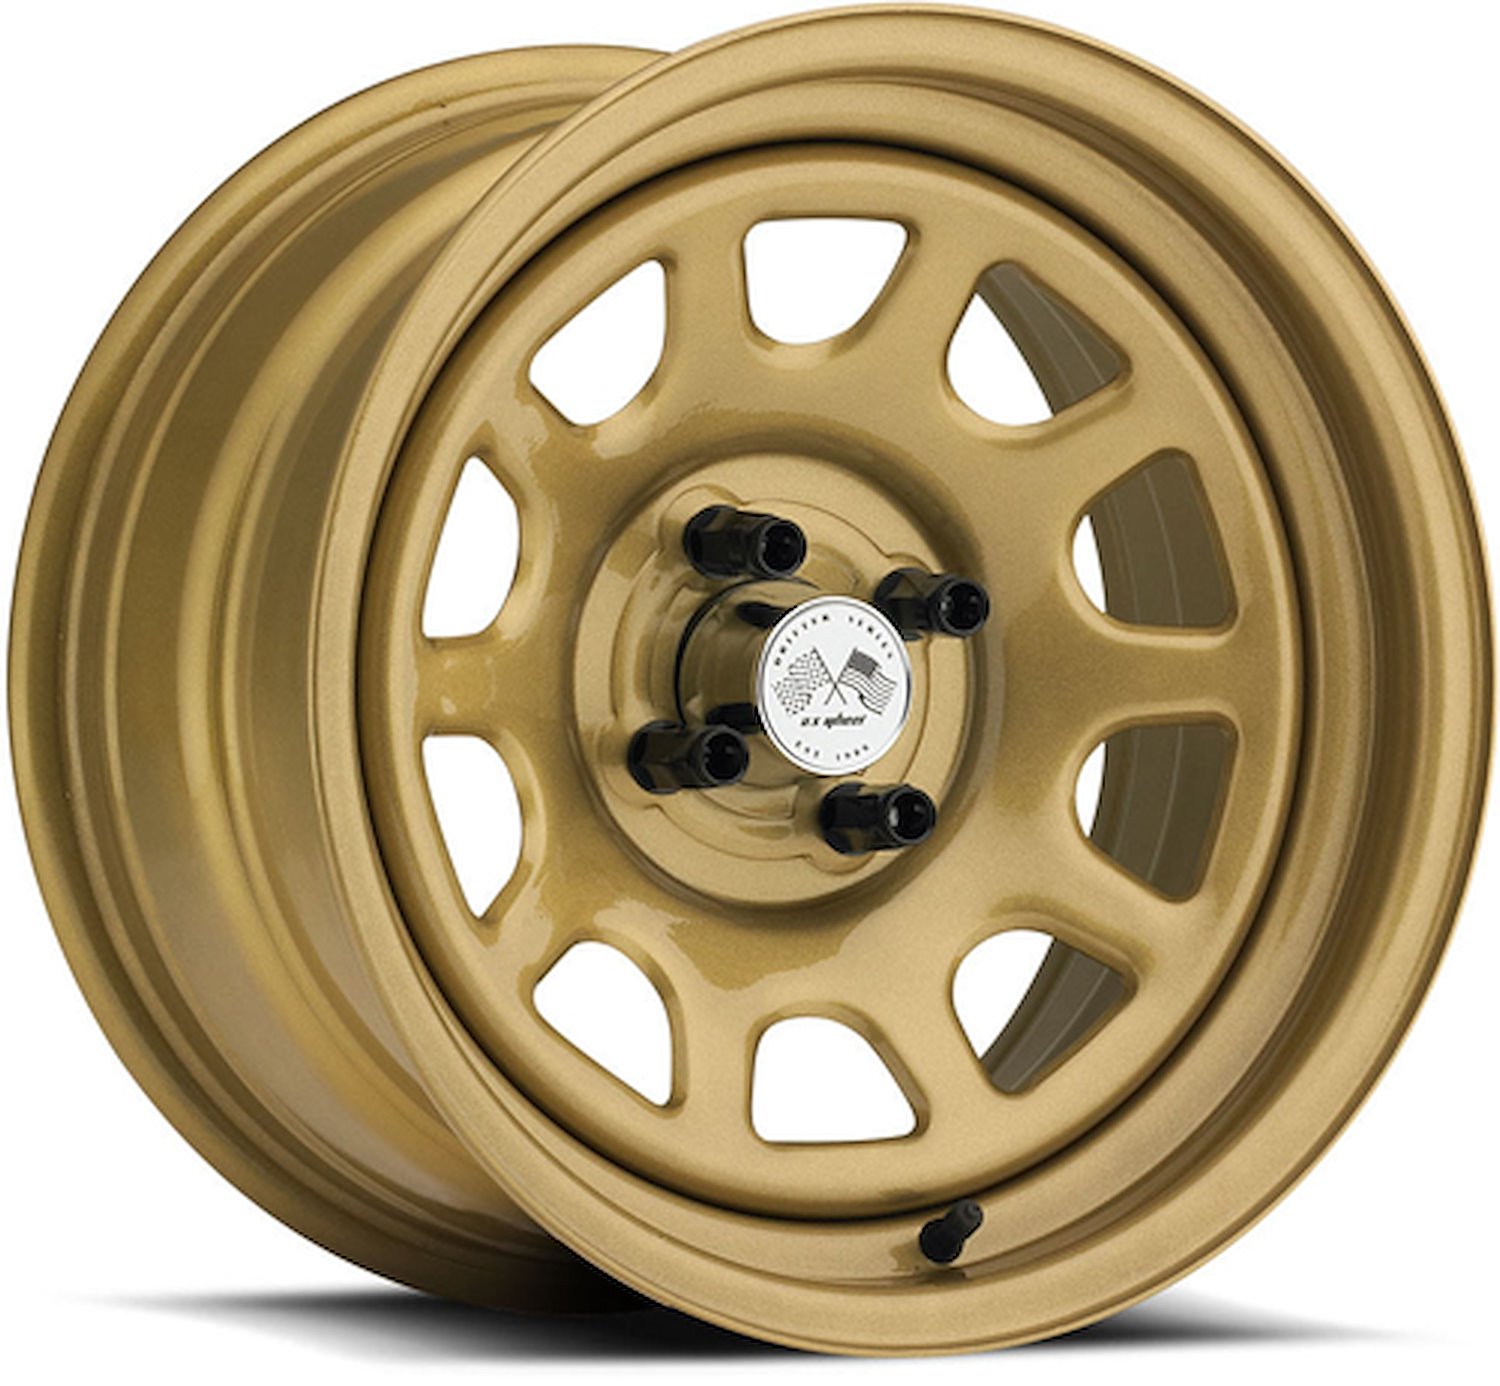 PAINTED DAYTONA FWD DRIFTER GOLD 16 x 8 5 x 45 Bolt Circle 45 Back Spacing 0 offset 266 Center Bore 1400 lbs Load Rating